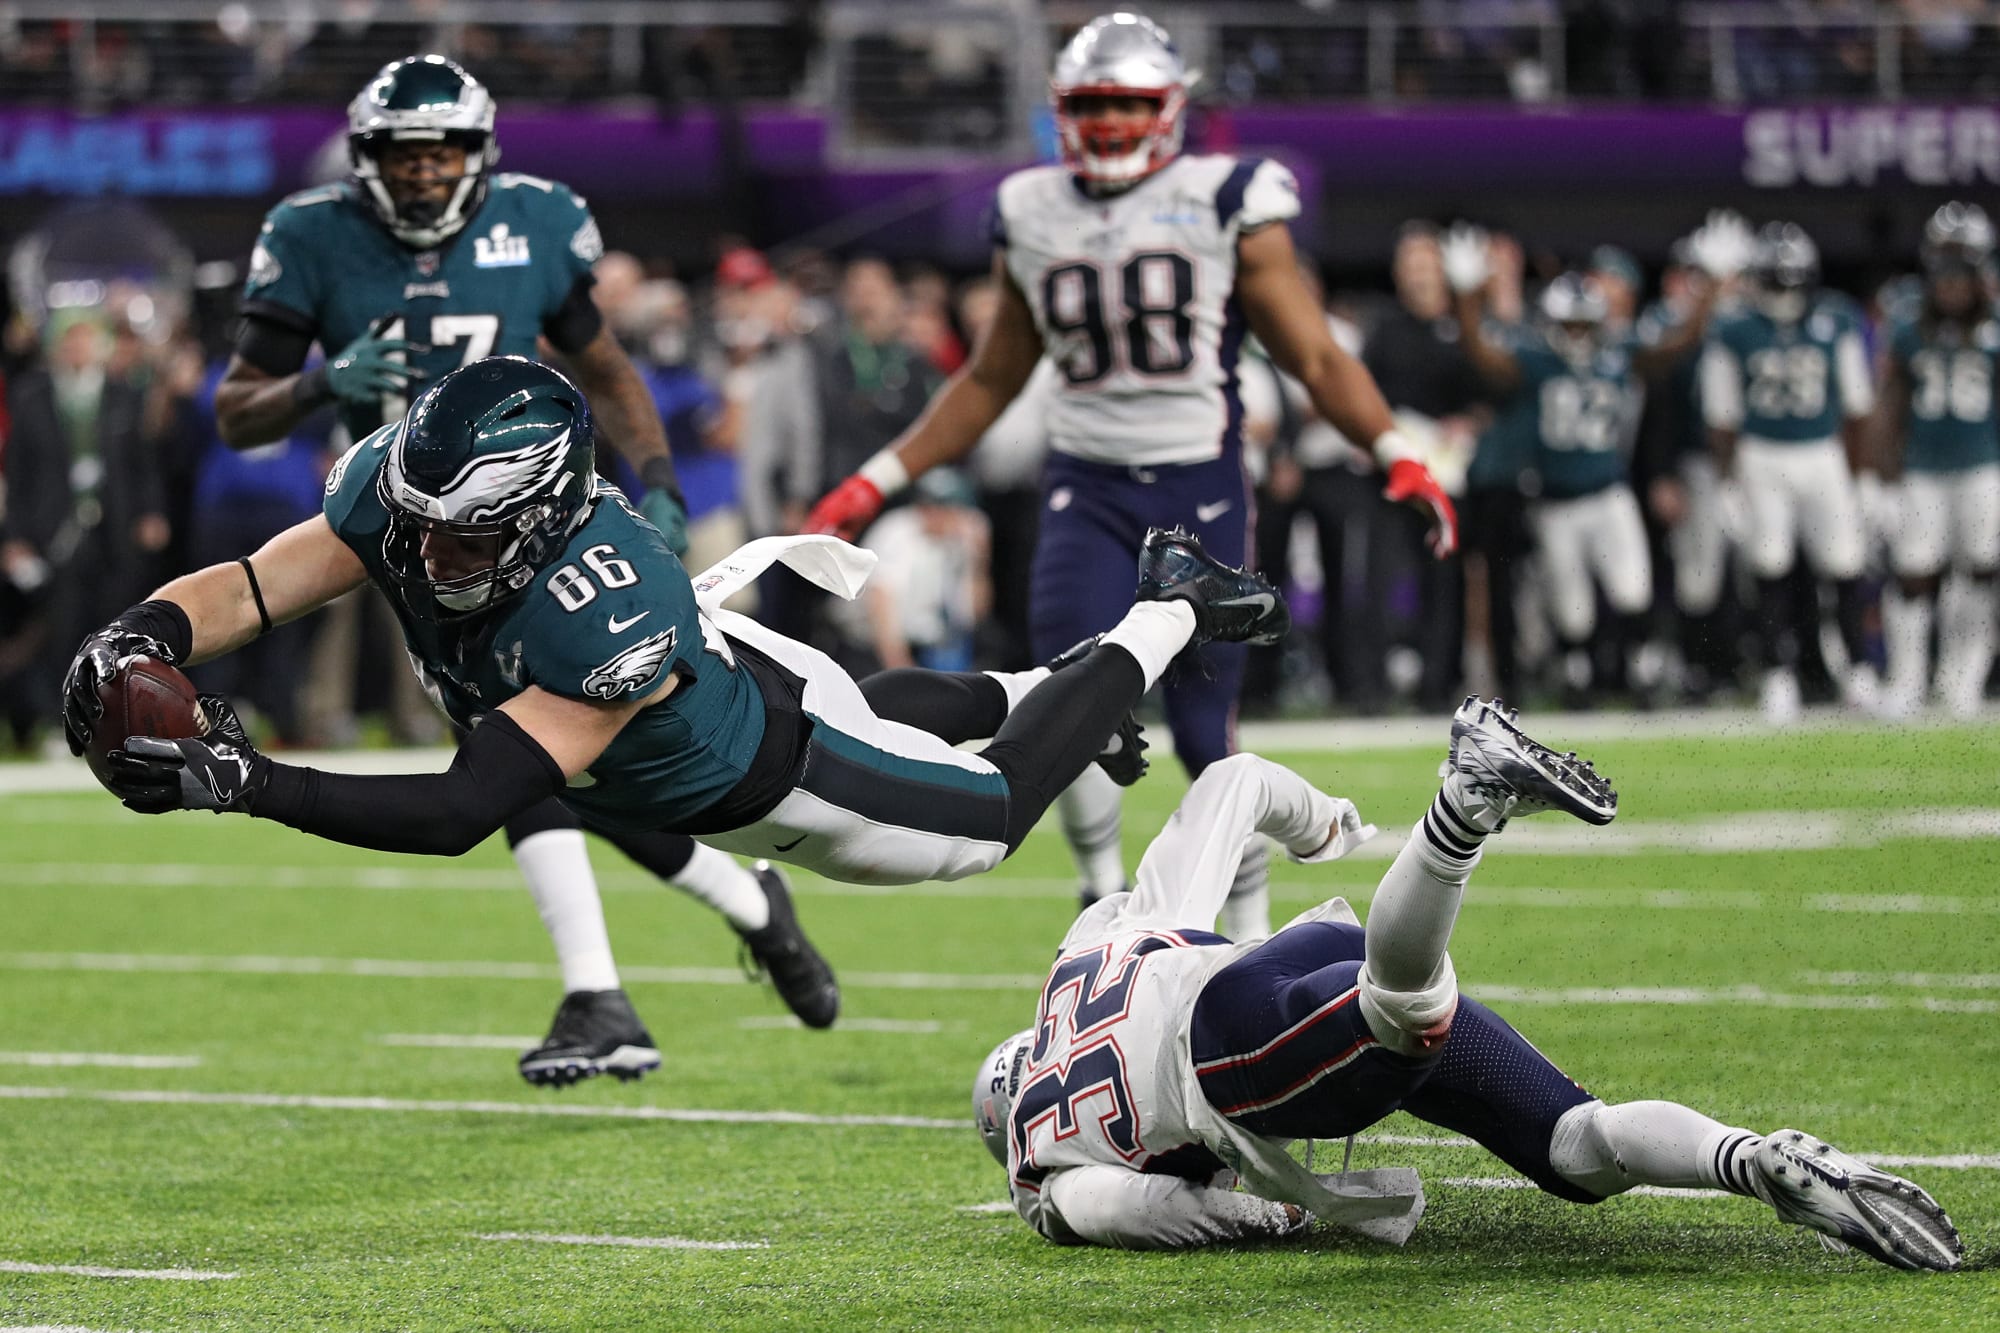 New England Patriots Defense lets them down in Super Bowl 52